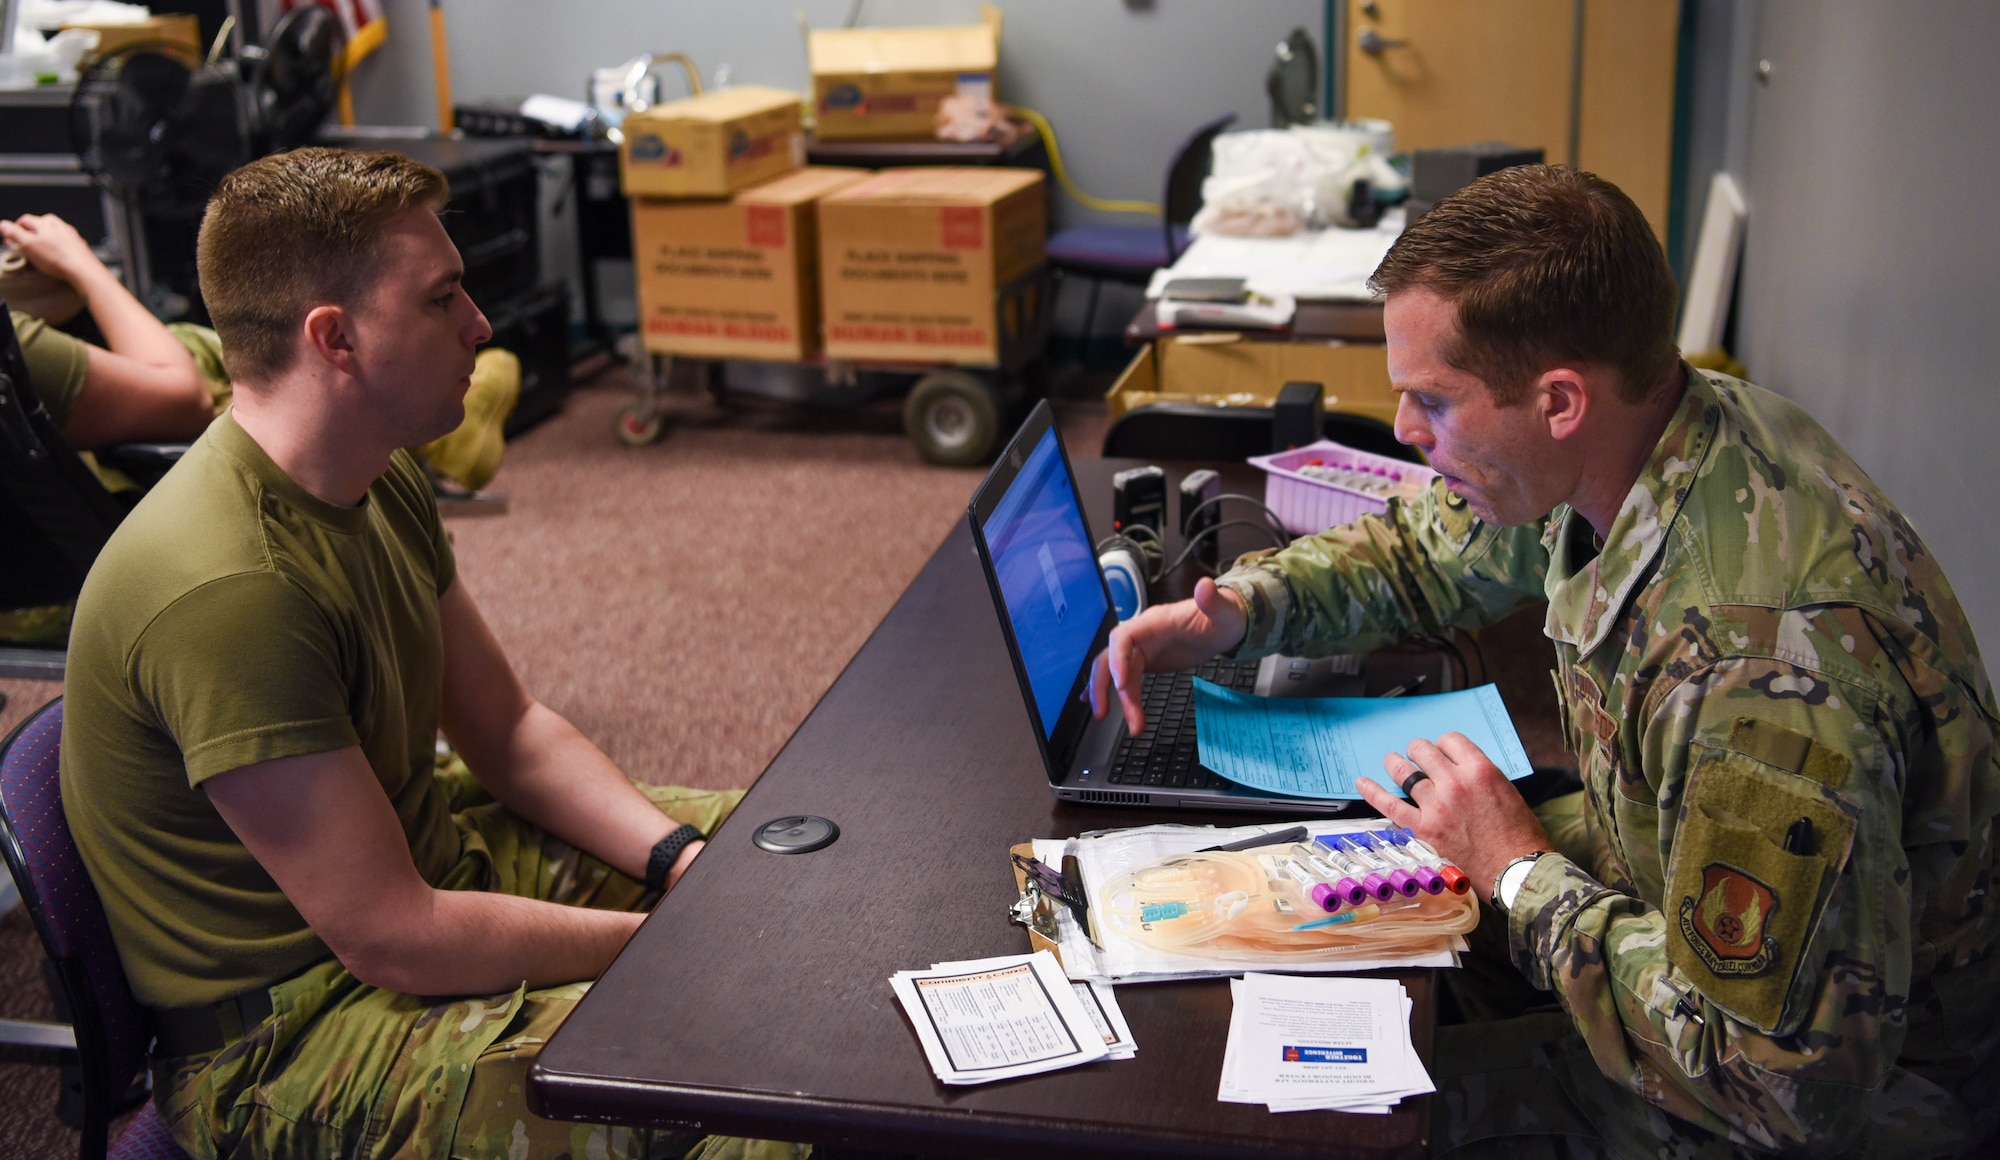 U.S. Air National Guard Member Staff Sgt. Seth Taylor (left), provides medical information to Staff Sgt. Michael Brady (right), As part of a pre-screening process conducted by the 88th Medical Group for a base wide blood drive on April 5, 2024 in Springfield, Ohio. The 178th Wing participates in The Armed Services Blood Program which provides quality blood products for service members, veterans and their families in both peace and war. (U.S. Air National Guard photo by Airman 1st Class Josh Kaeser)